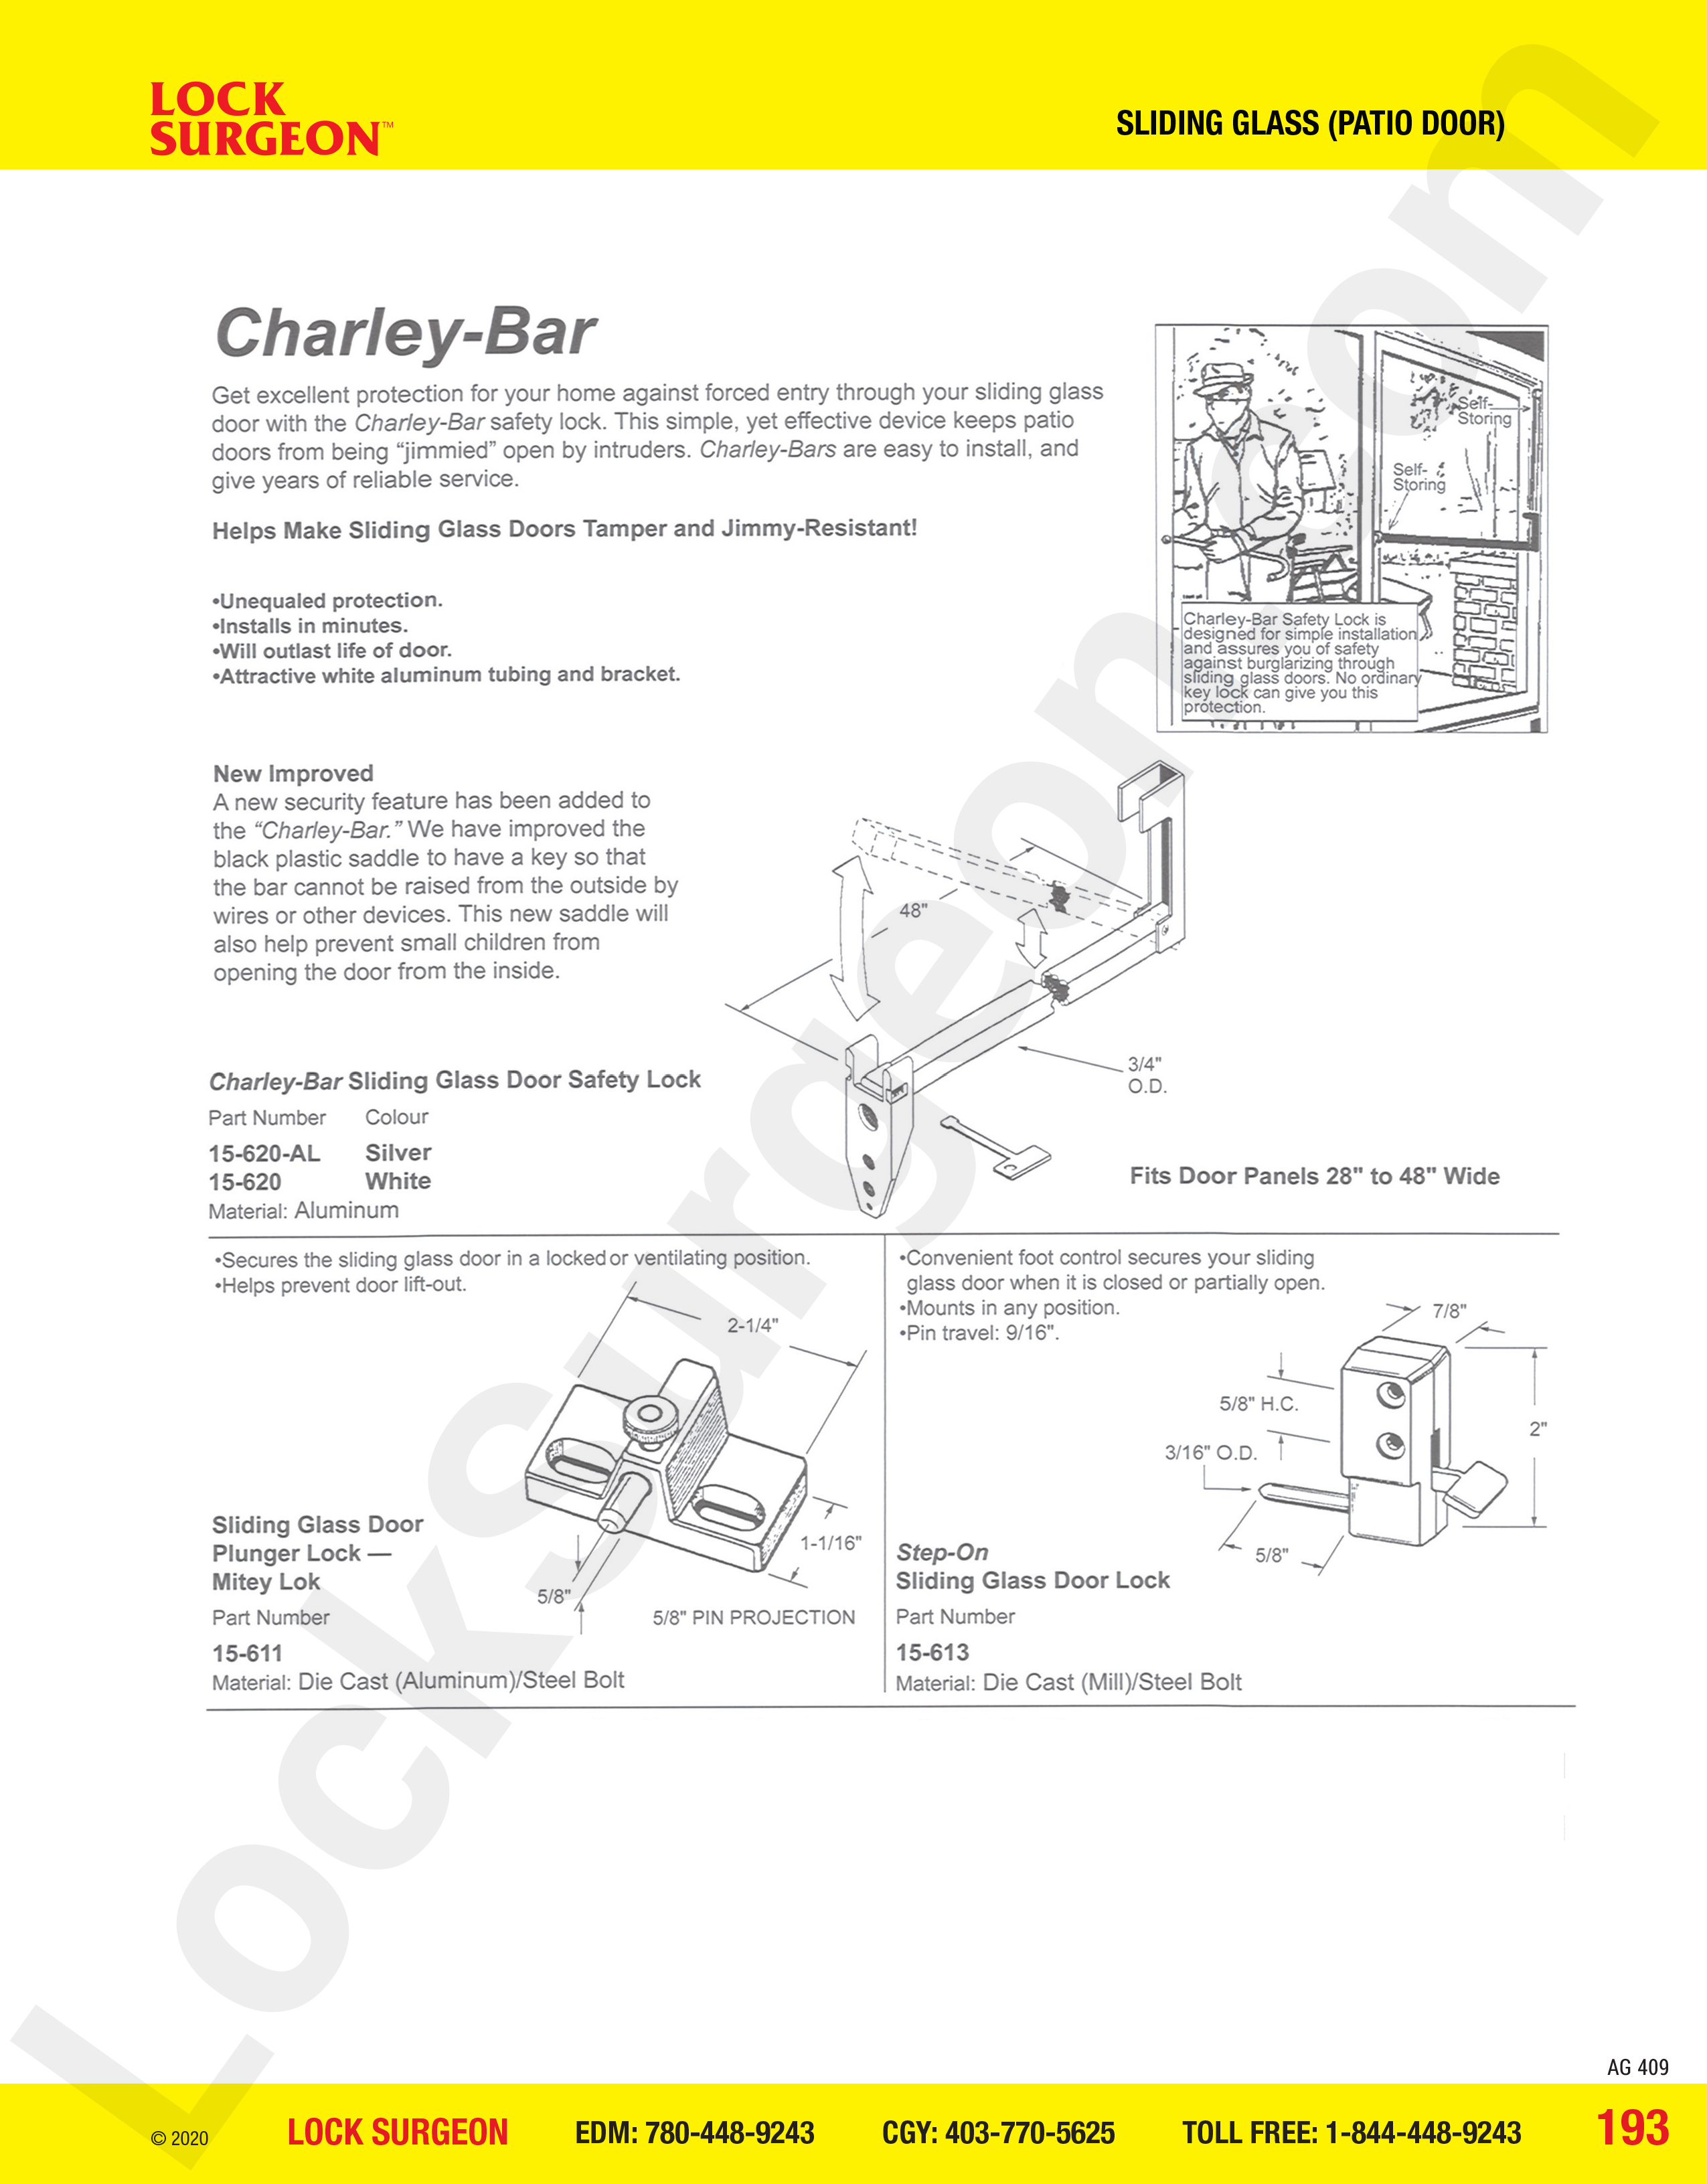 Sliding Glass and Patio Door charley-bar